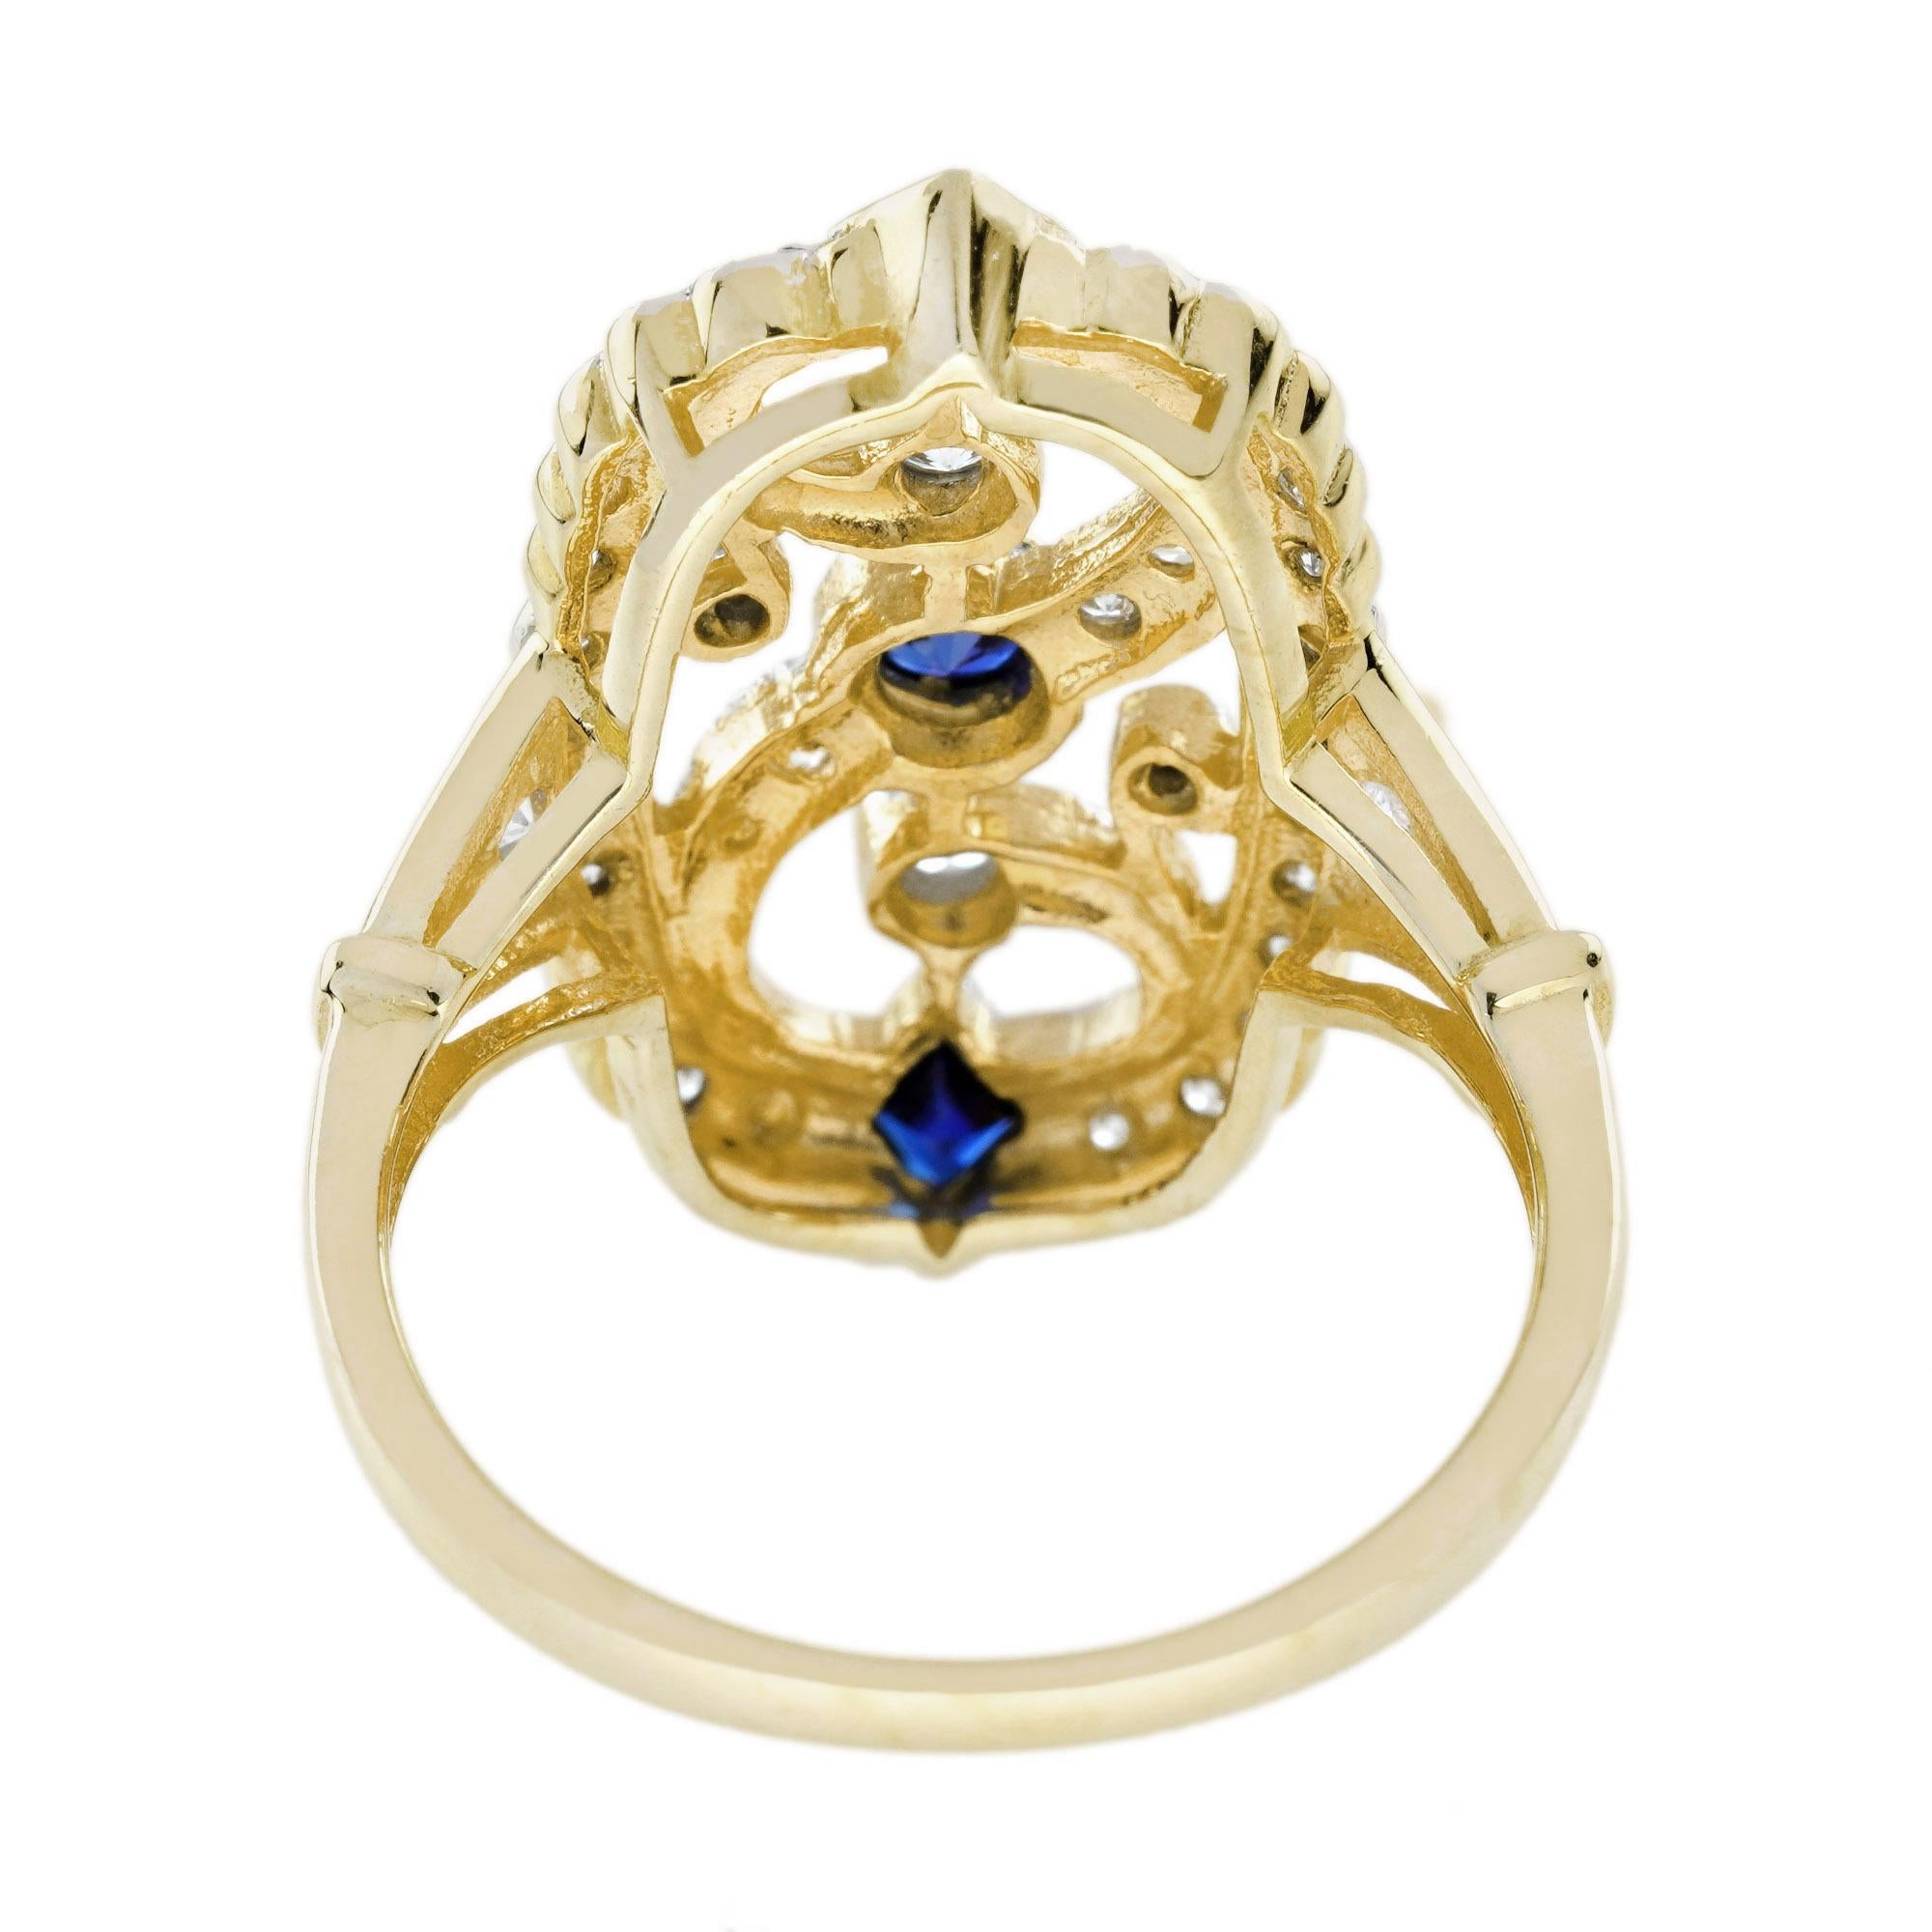 For Sale:  Blue Sapphire and Diamond Vintage Style Filigree Ring in 14K Two Tone Gold 5